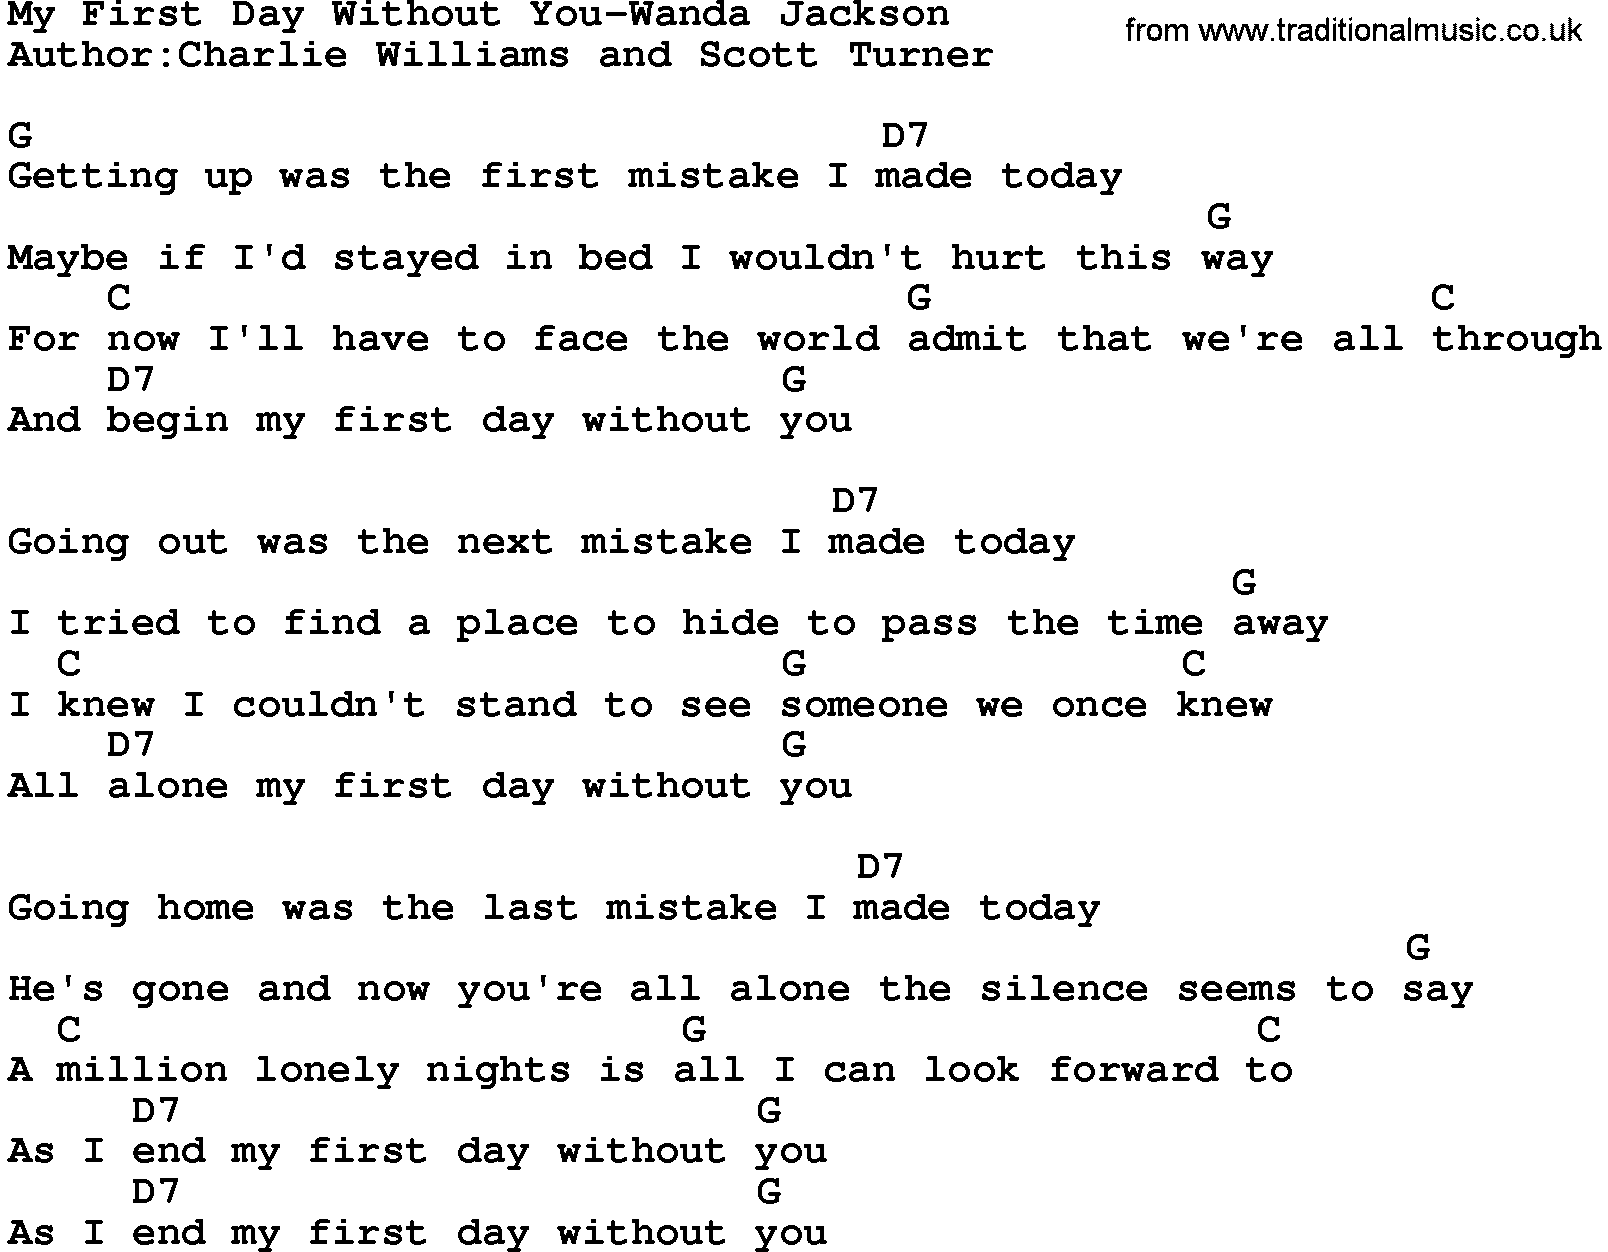 Country music song: My First Day Without You-Wanda Jackson lyrics and chords